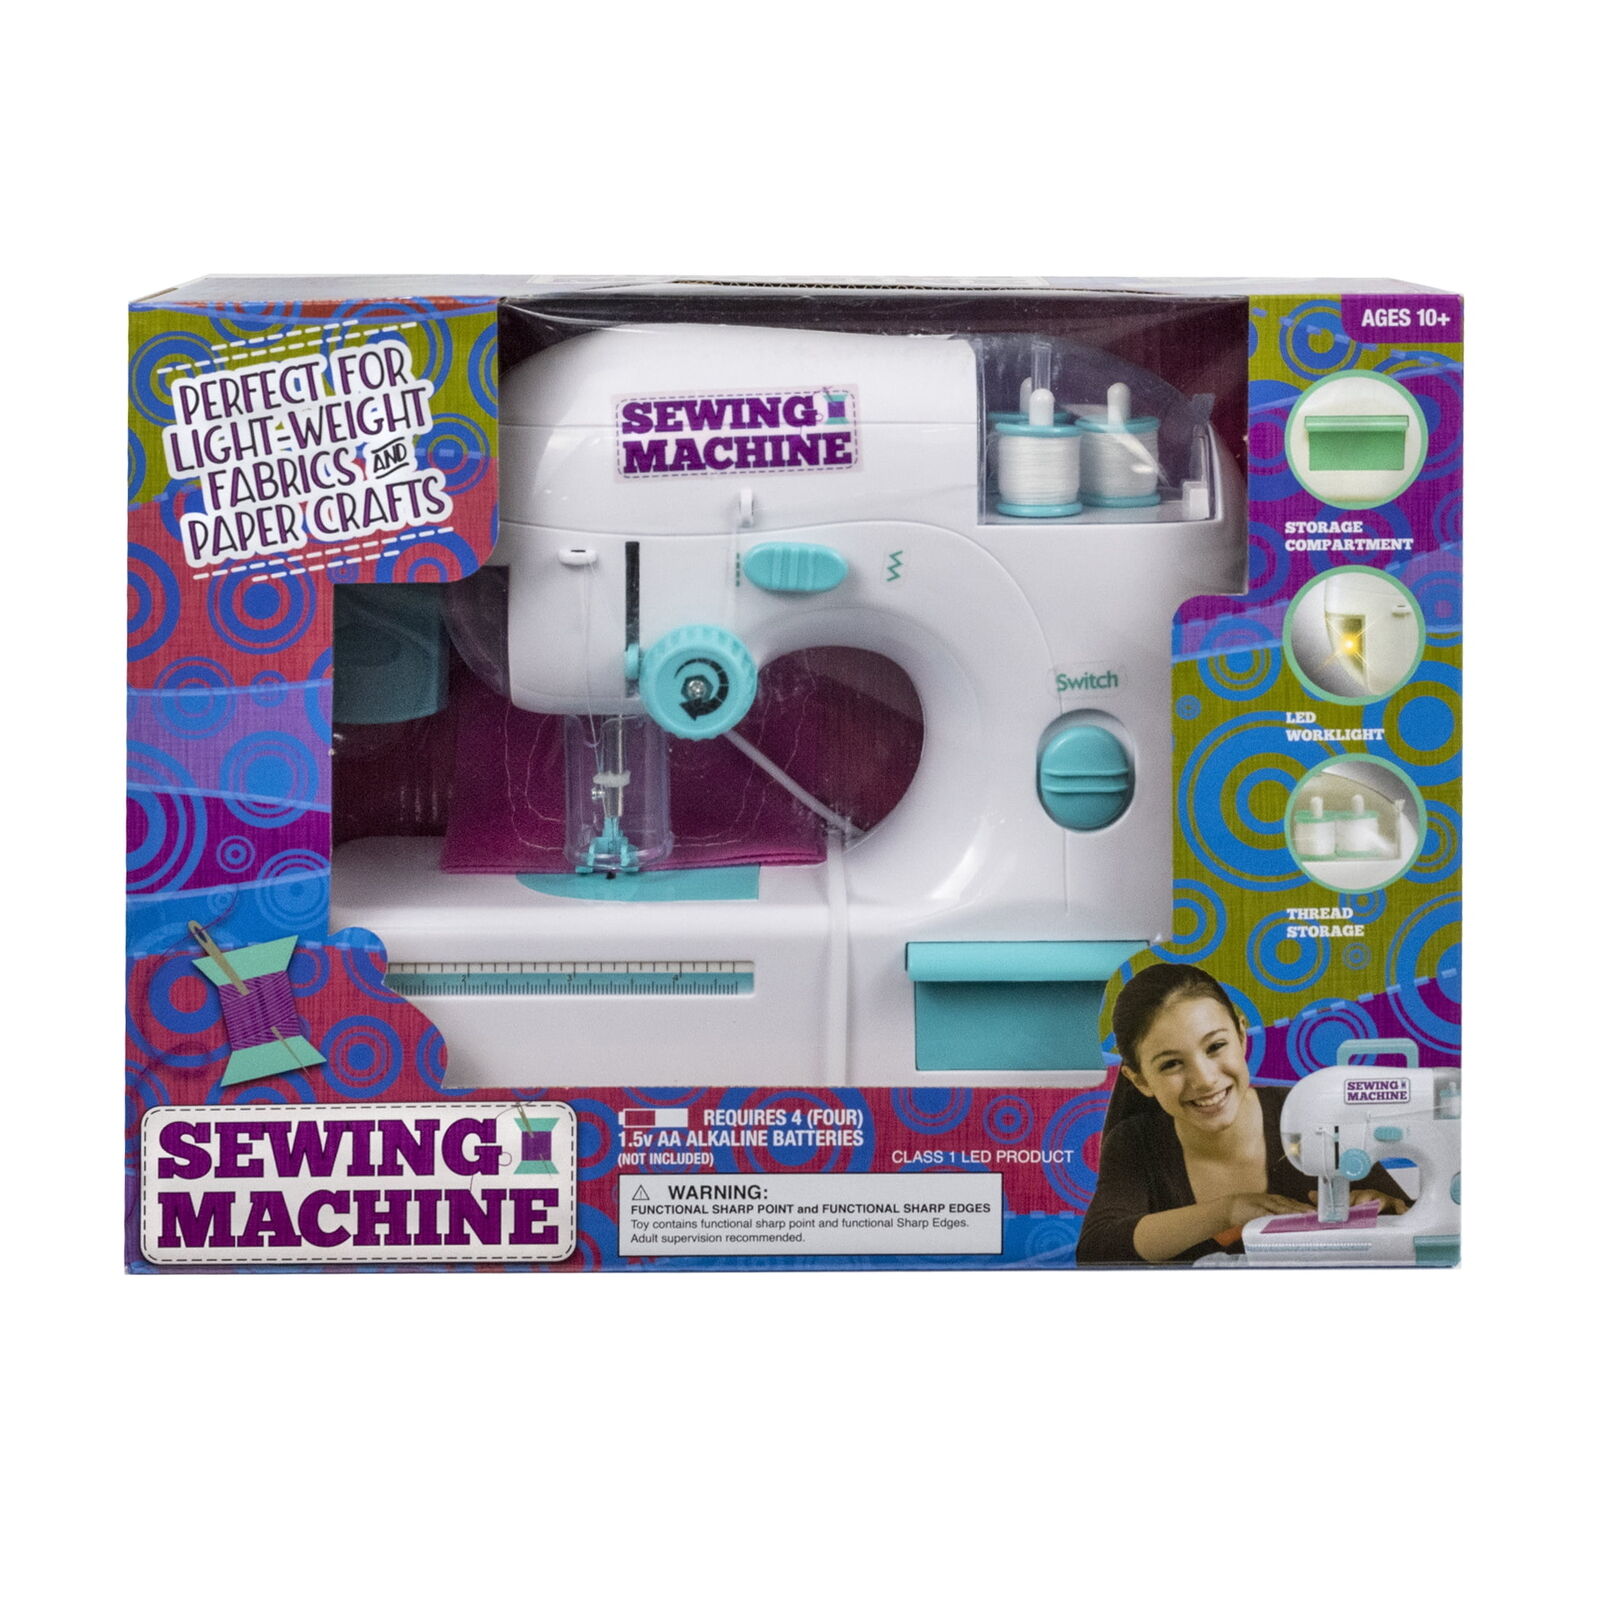 Battery Operated Children\'s Toy Sewing Machine - #GS20827M Ages 10 years and up